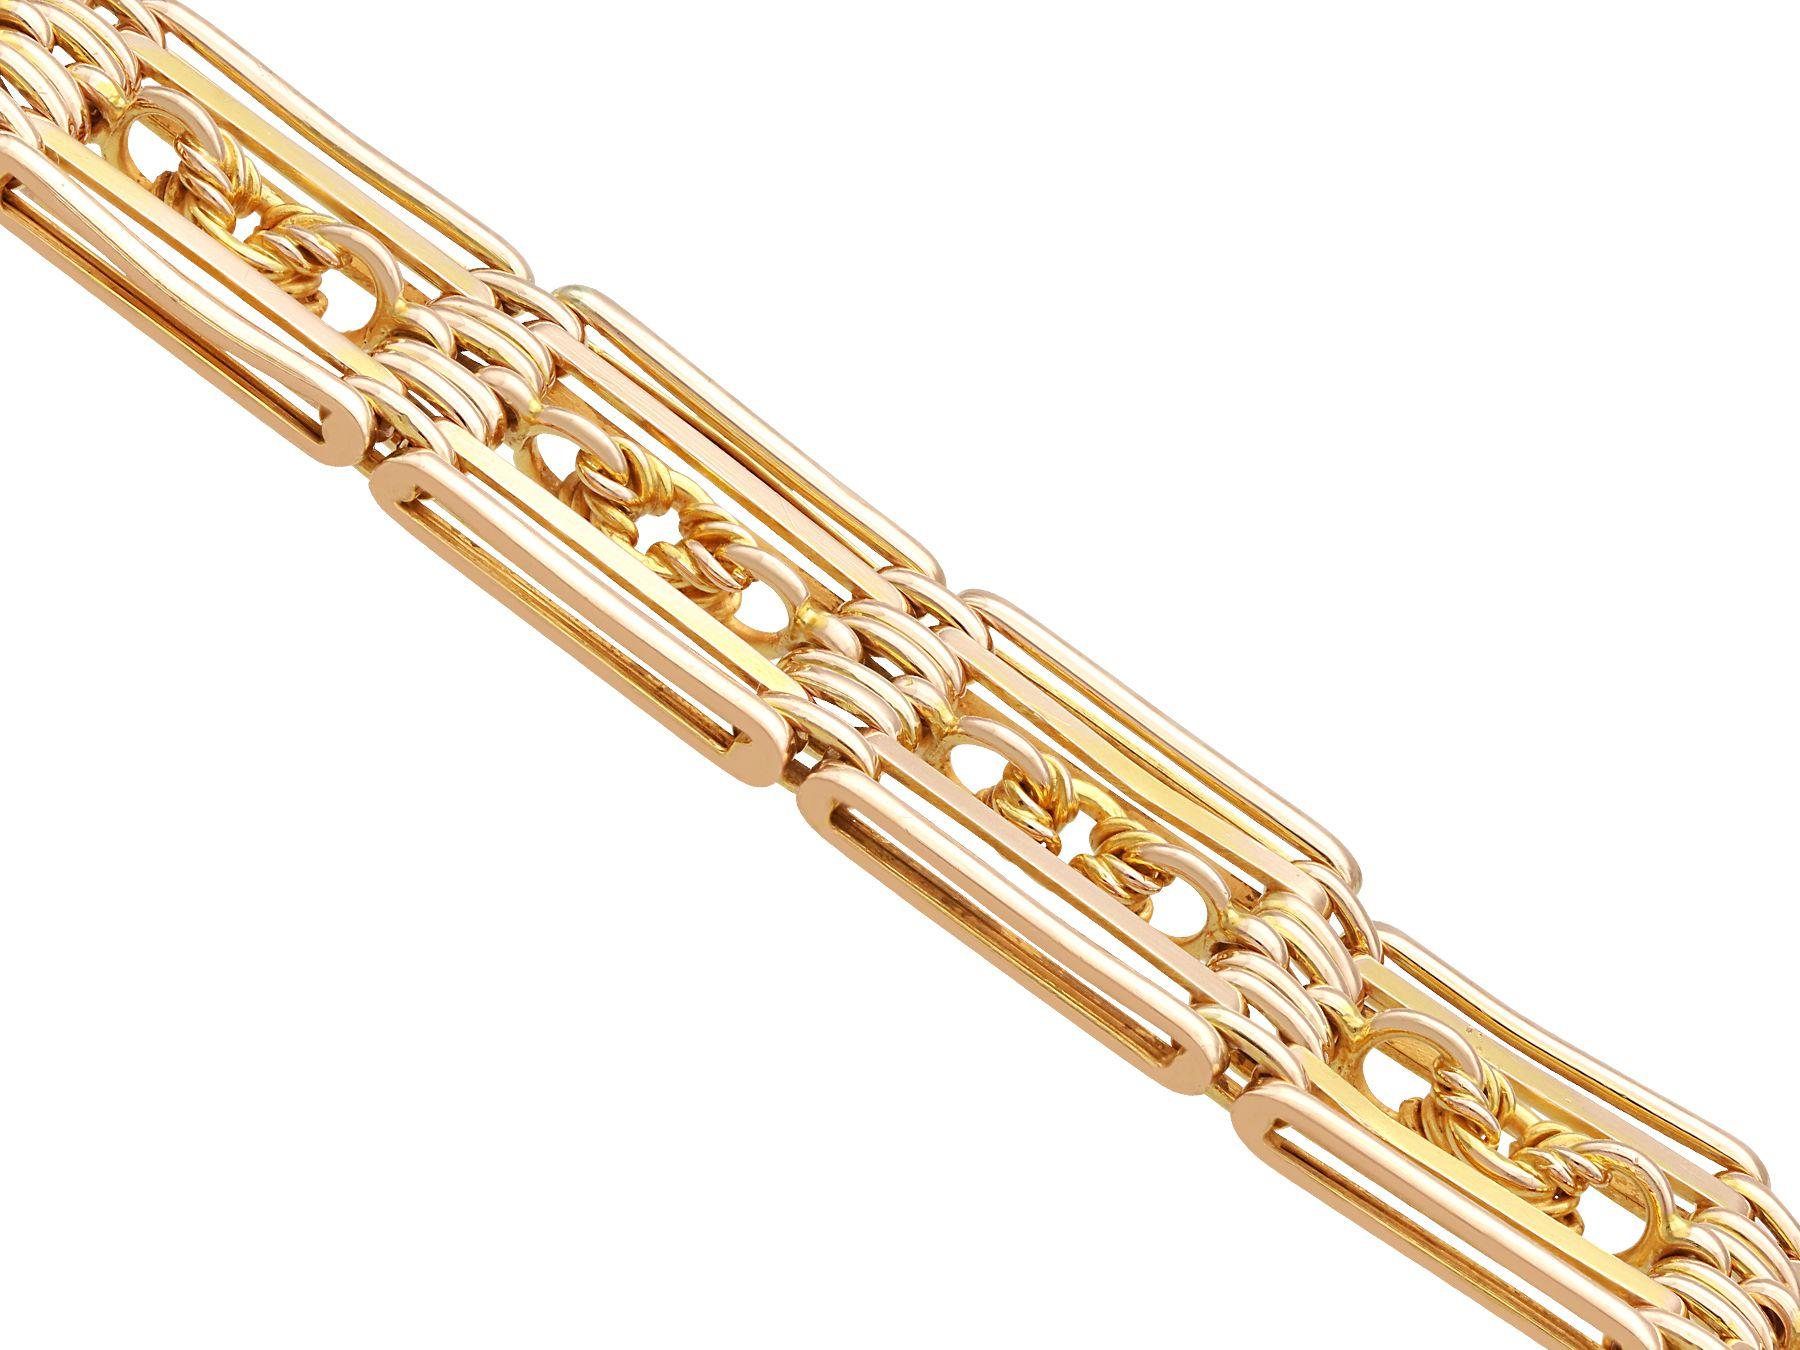 Antique 1920s Yellow Gold Gate Bracelet In Excellent Condition For Sale In Jesmond, Newcastle Upon Tyne